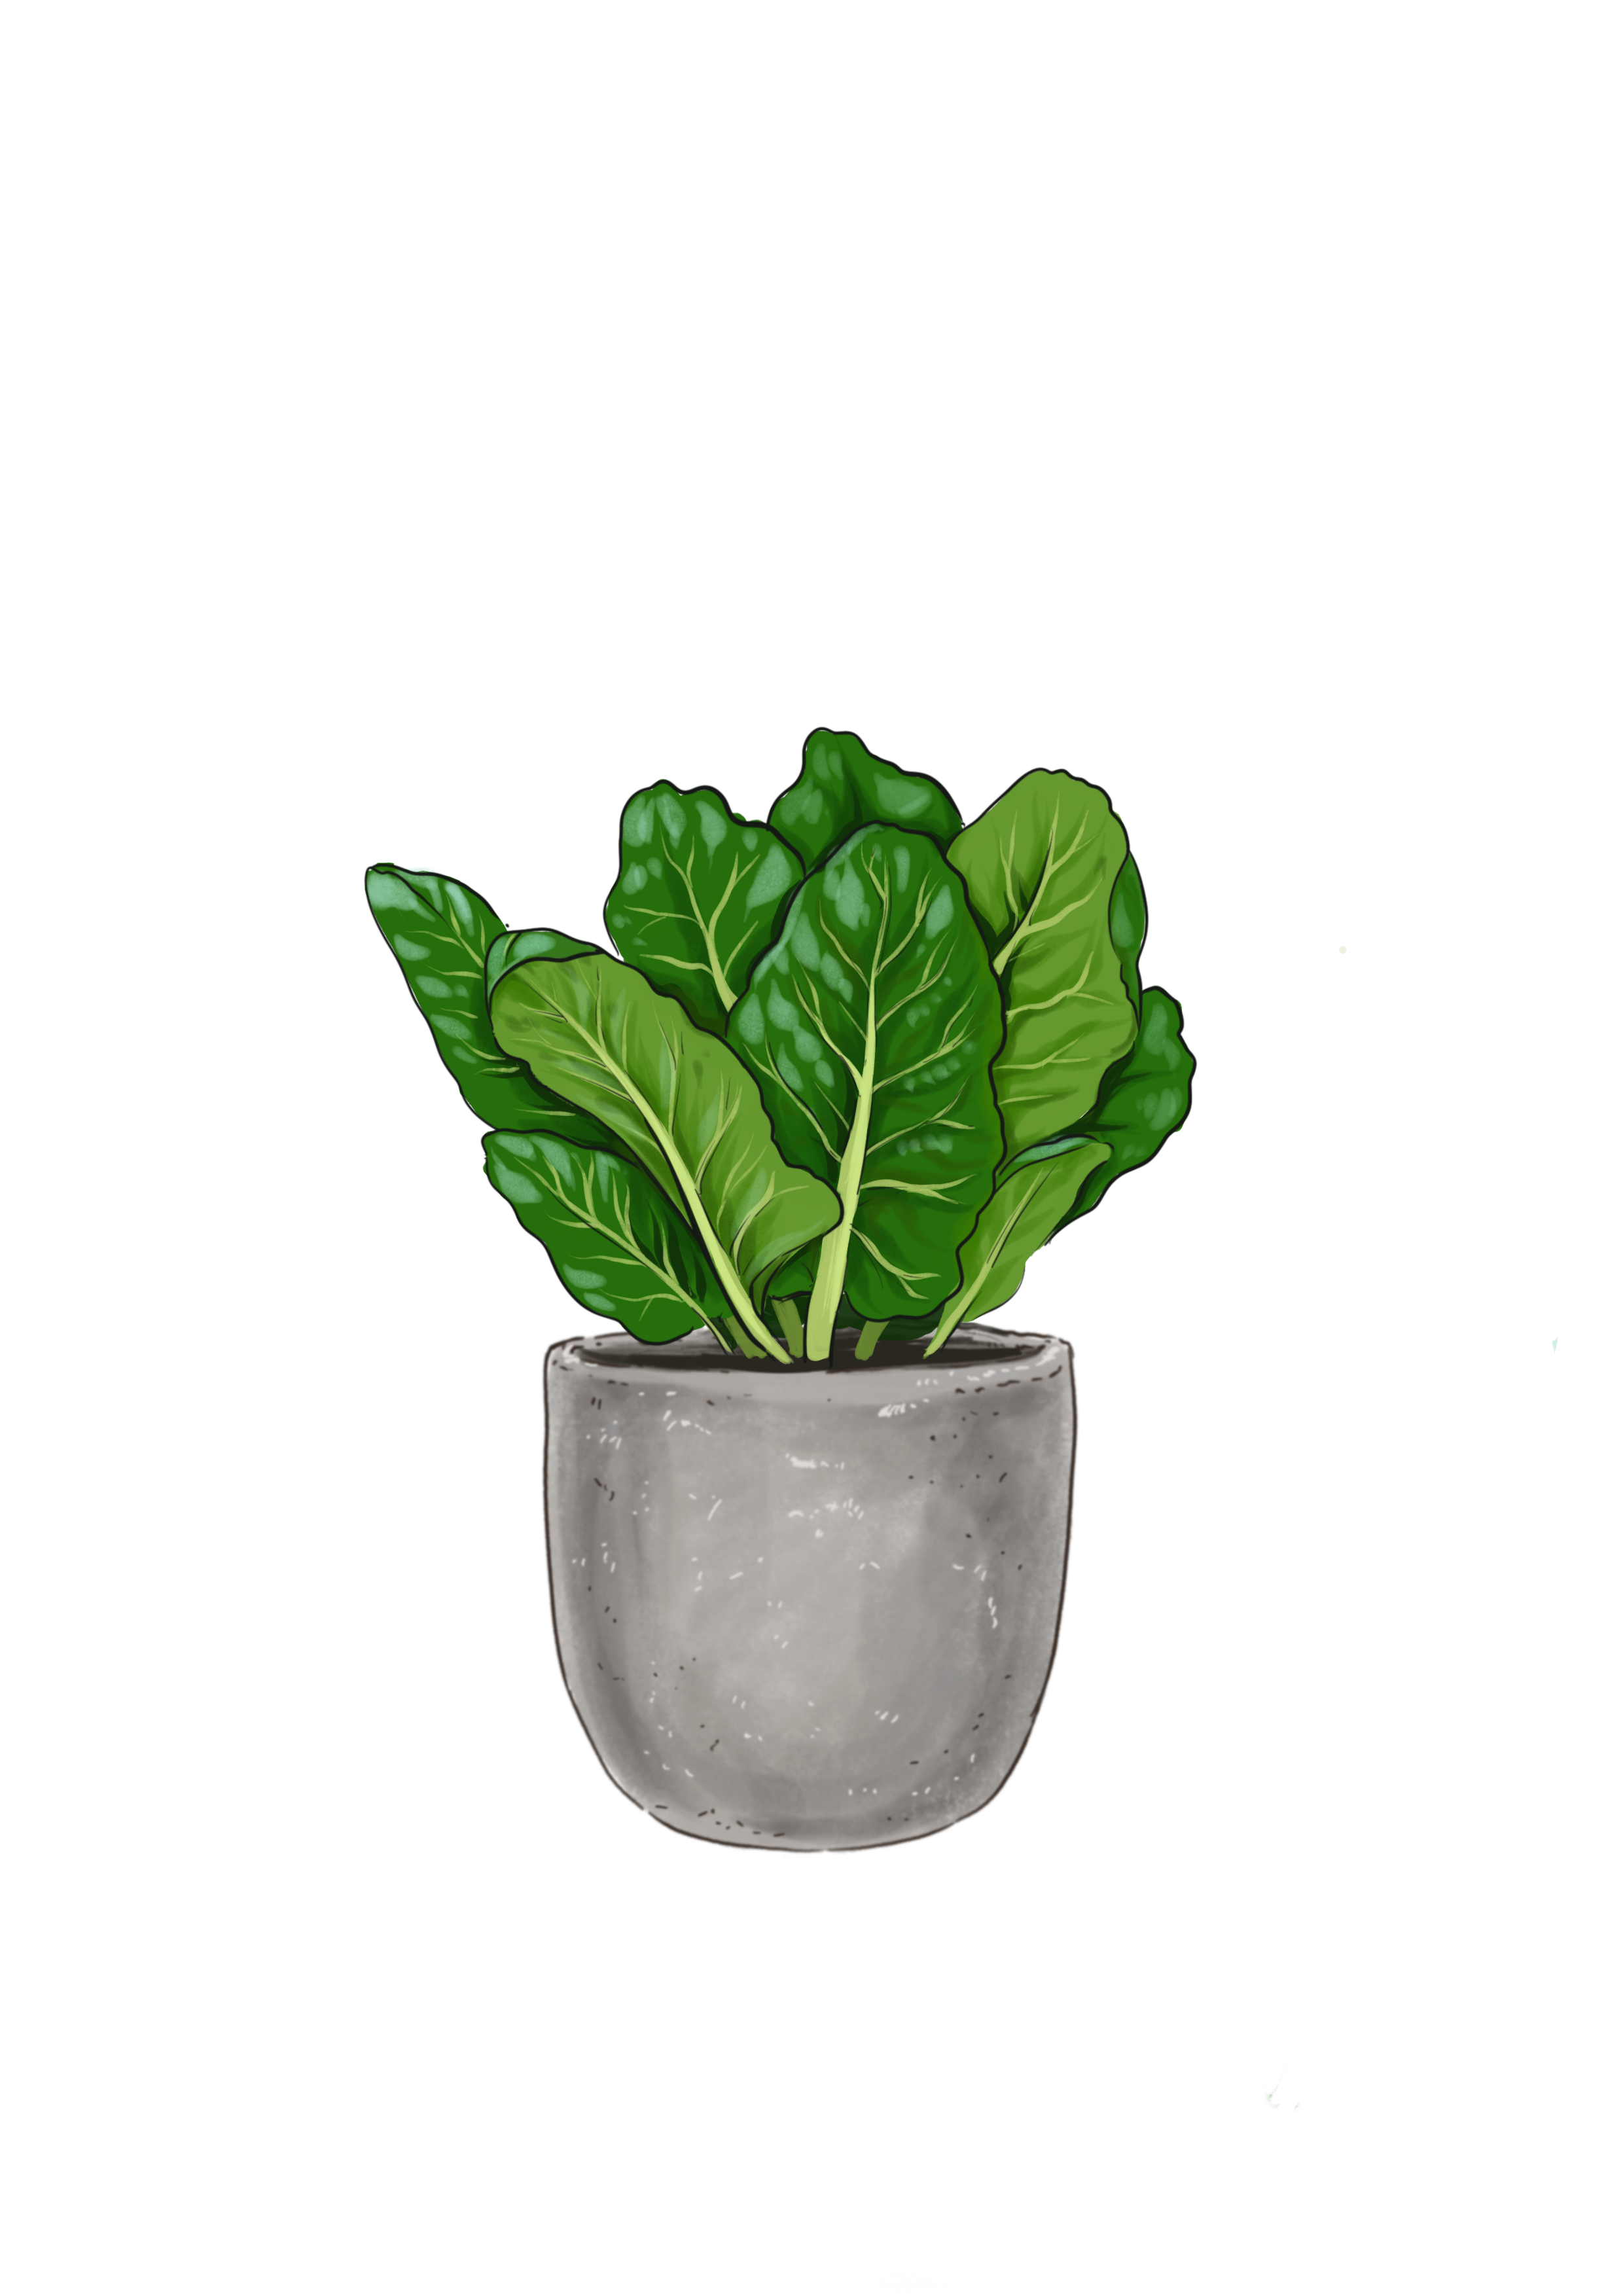 Spinach hand-painted watercolor pencil drawing - Stock Illustration  [76466423] - PIXTA